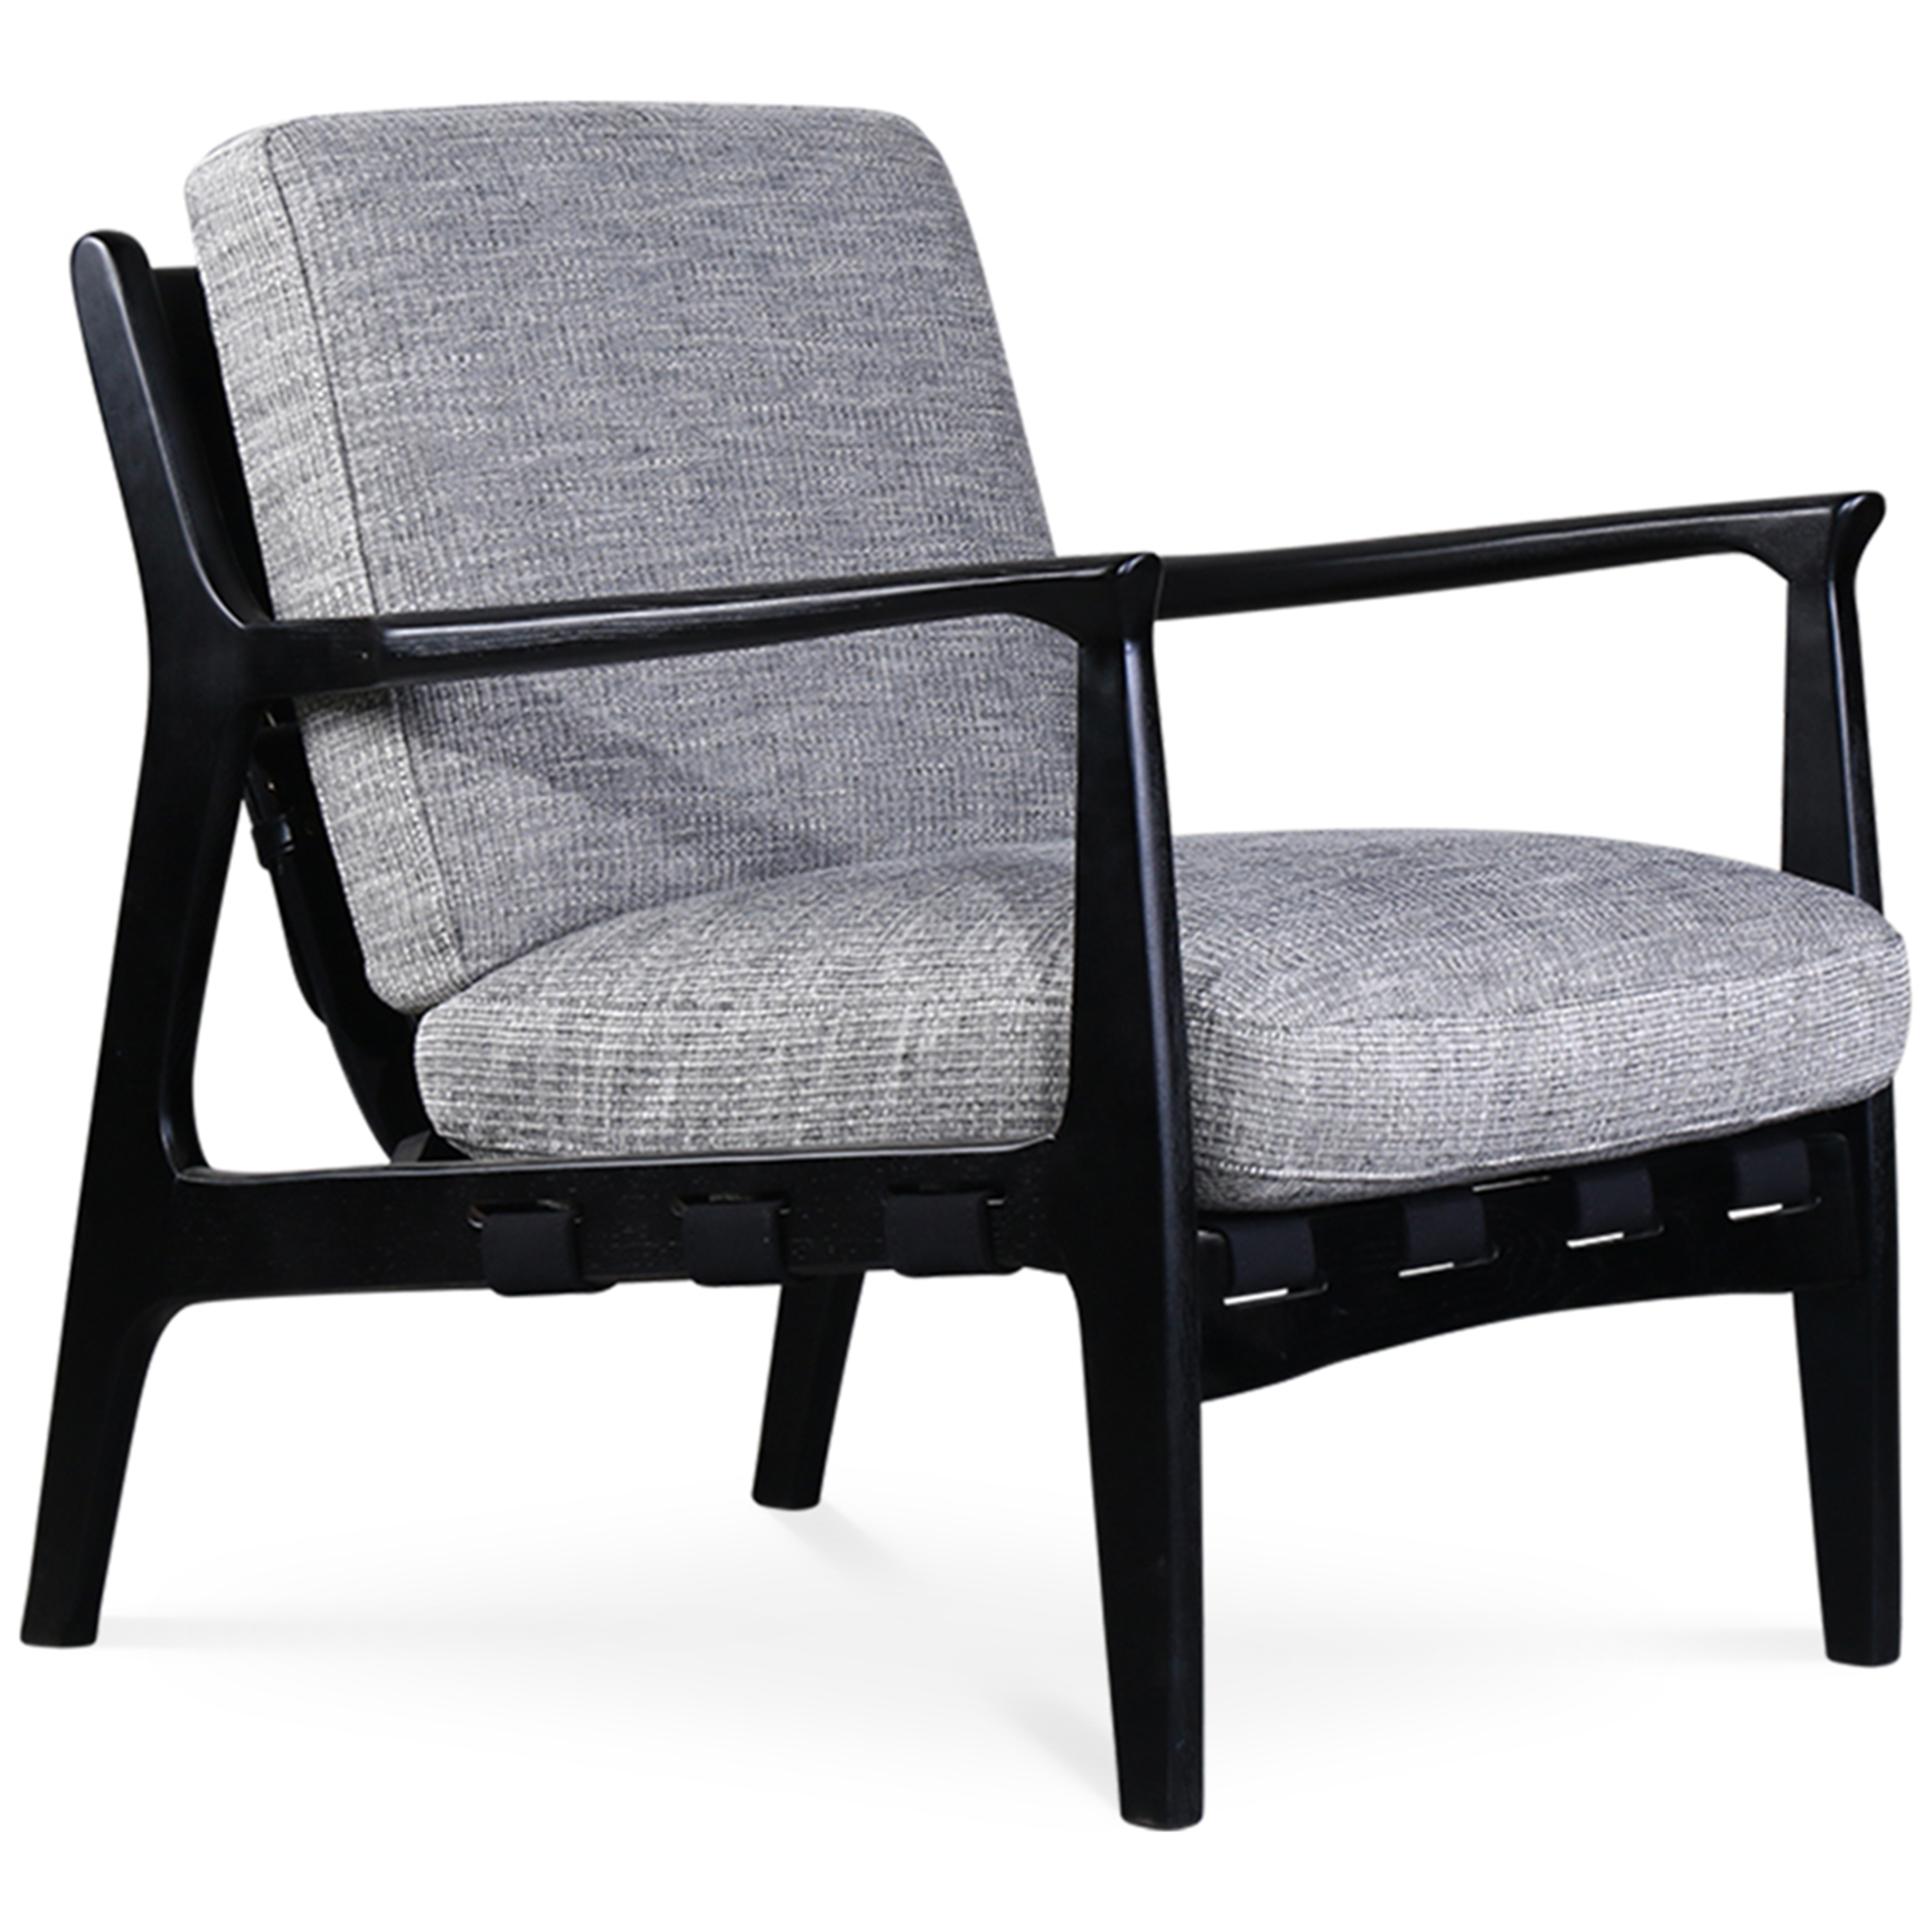 WS - At Ease armchair - Black & Fabric upholstery - (Front angle)